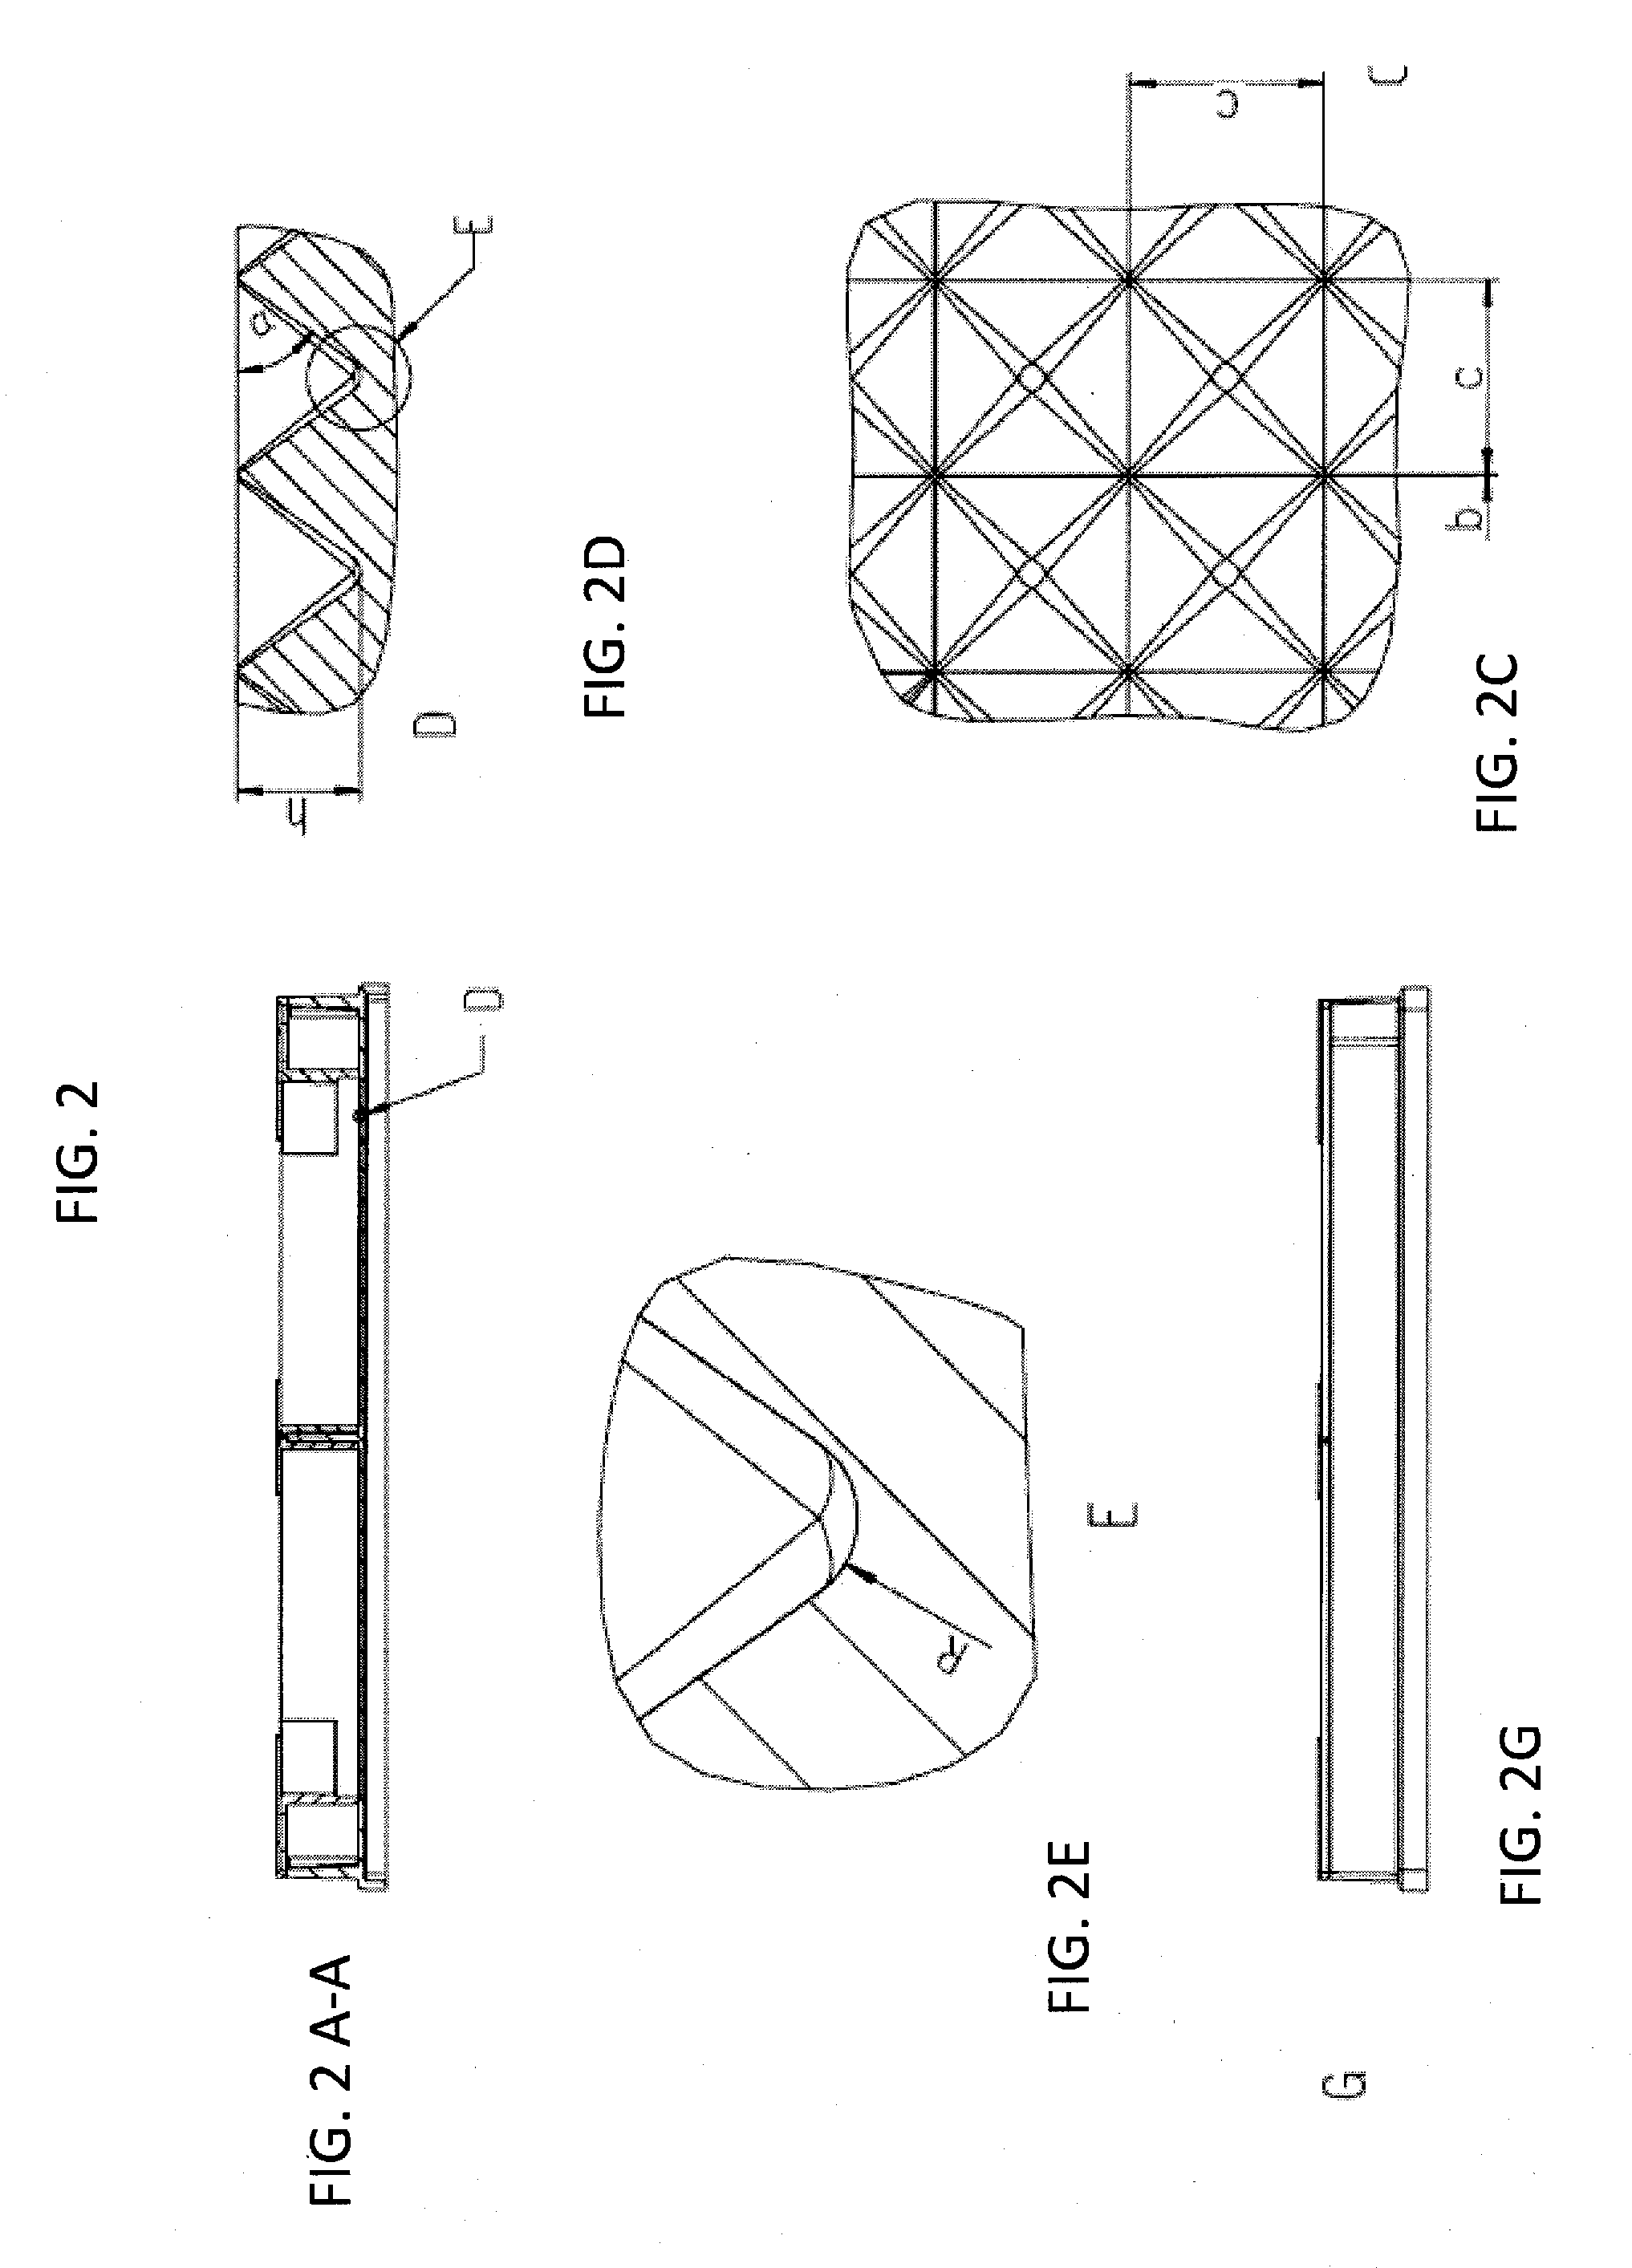 Devices for the production of cell clusters of defined cell numbers and cluster sizes